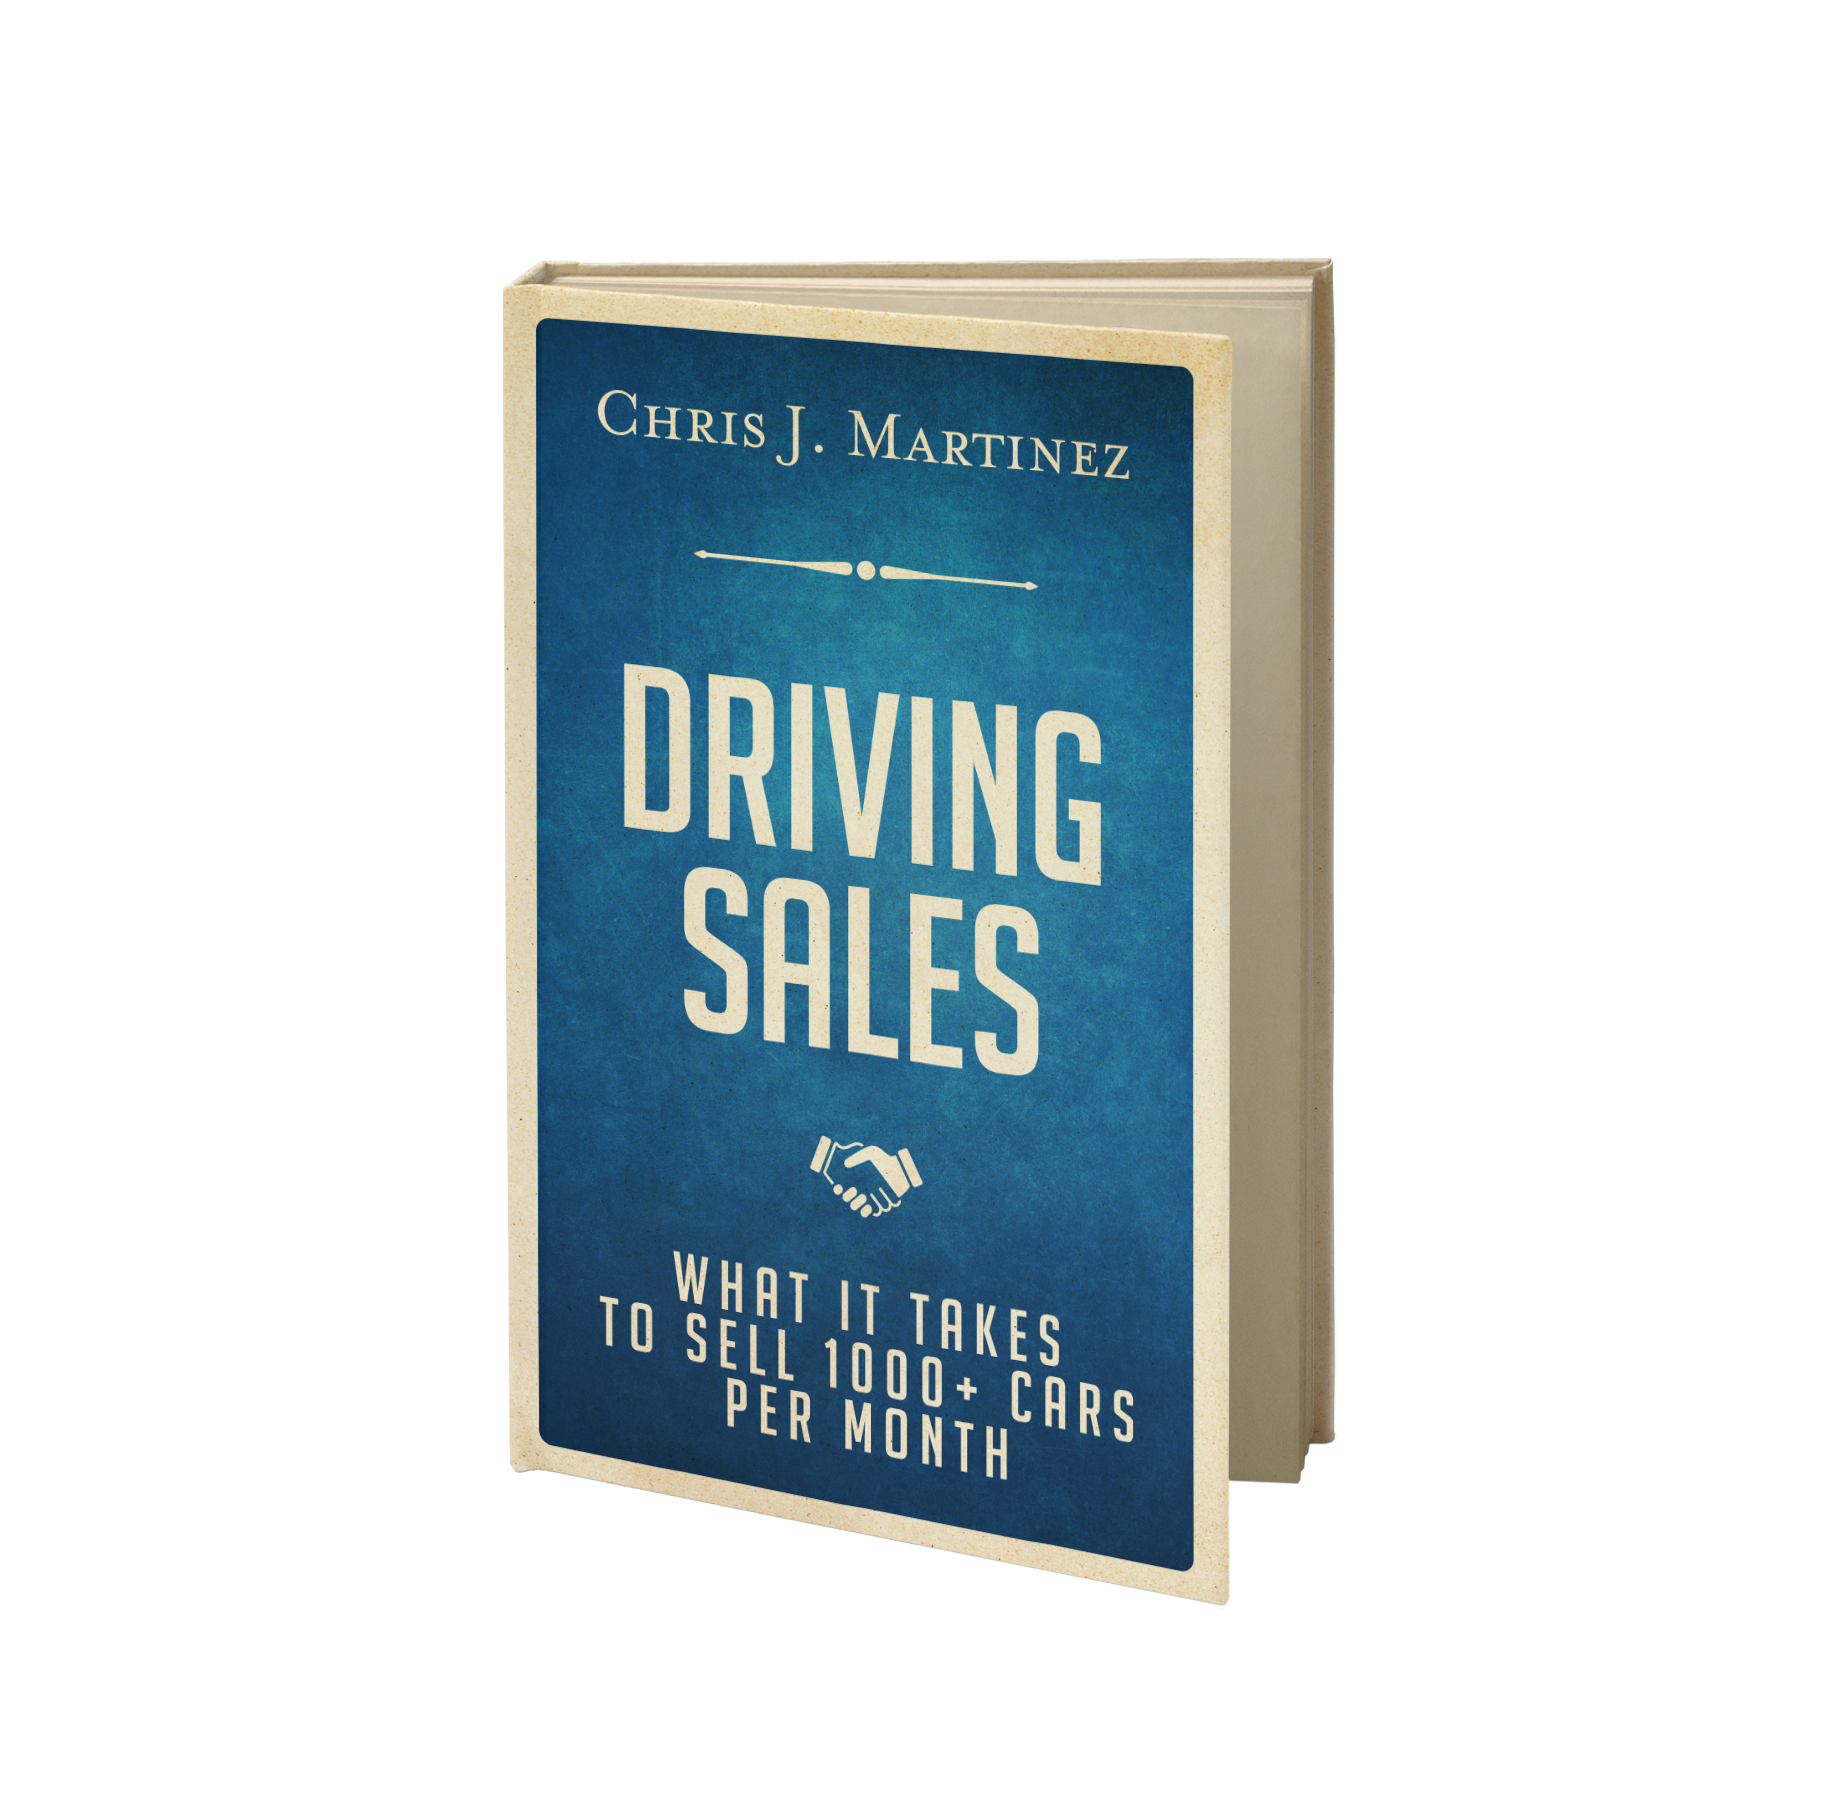 Driving Sales - how to sell 1000 cars per month